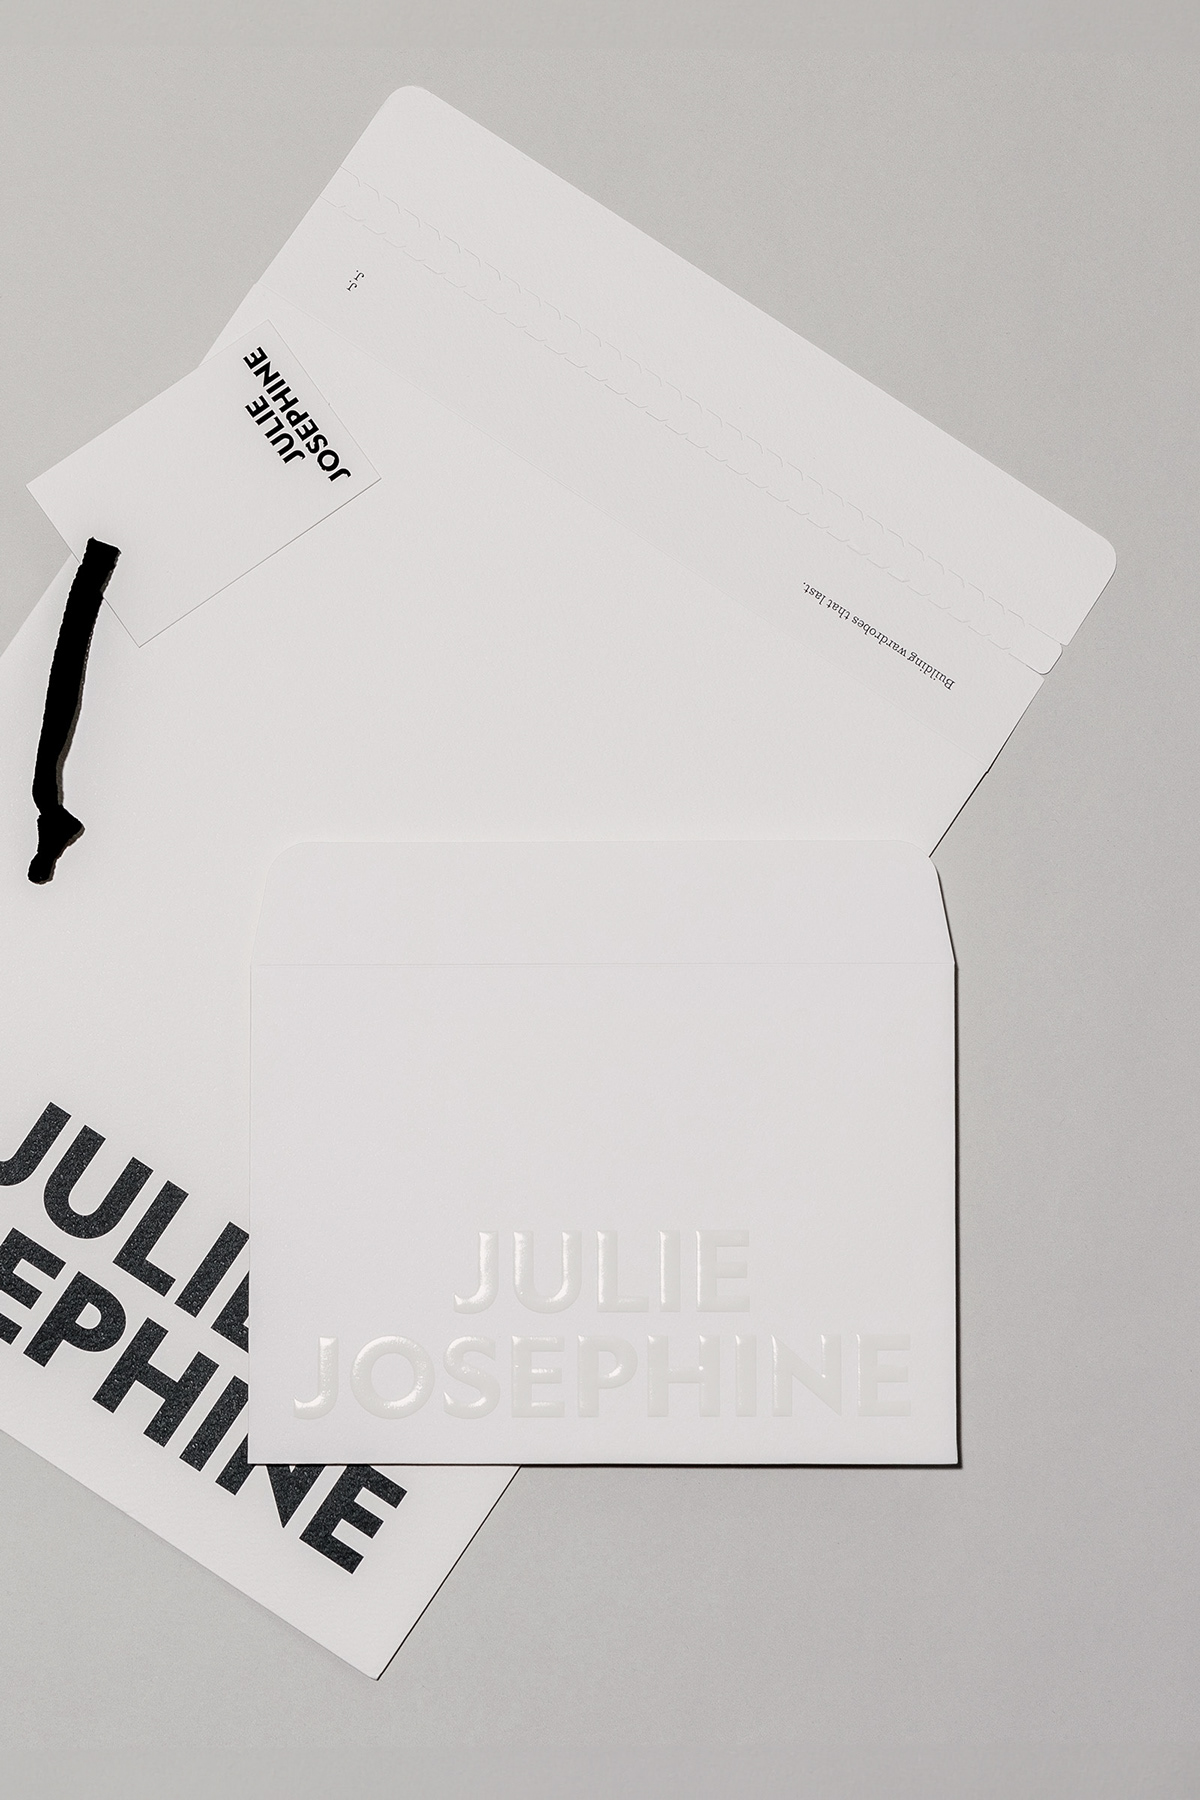 A collection of white stationery and print materials for fashion label Julie Josephine